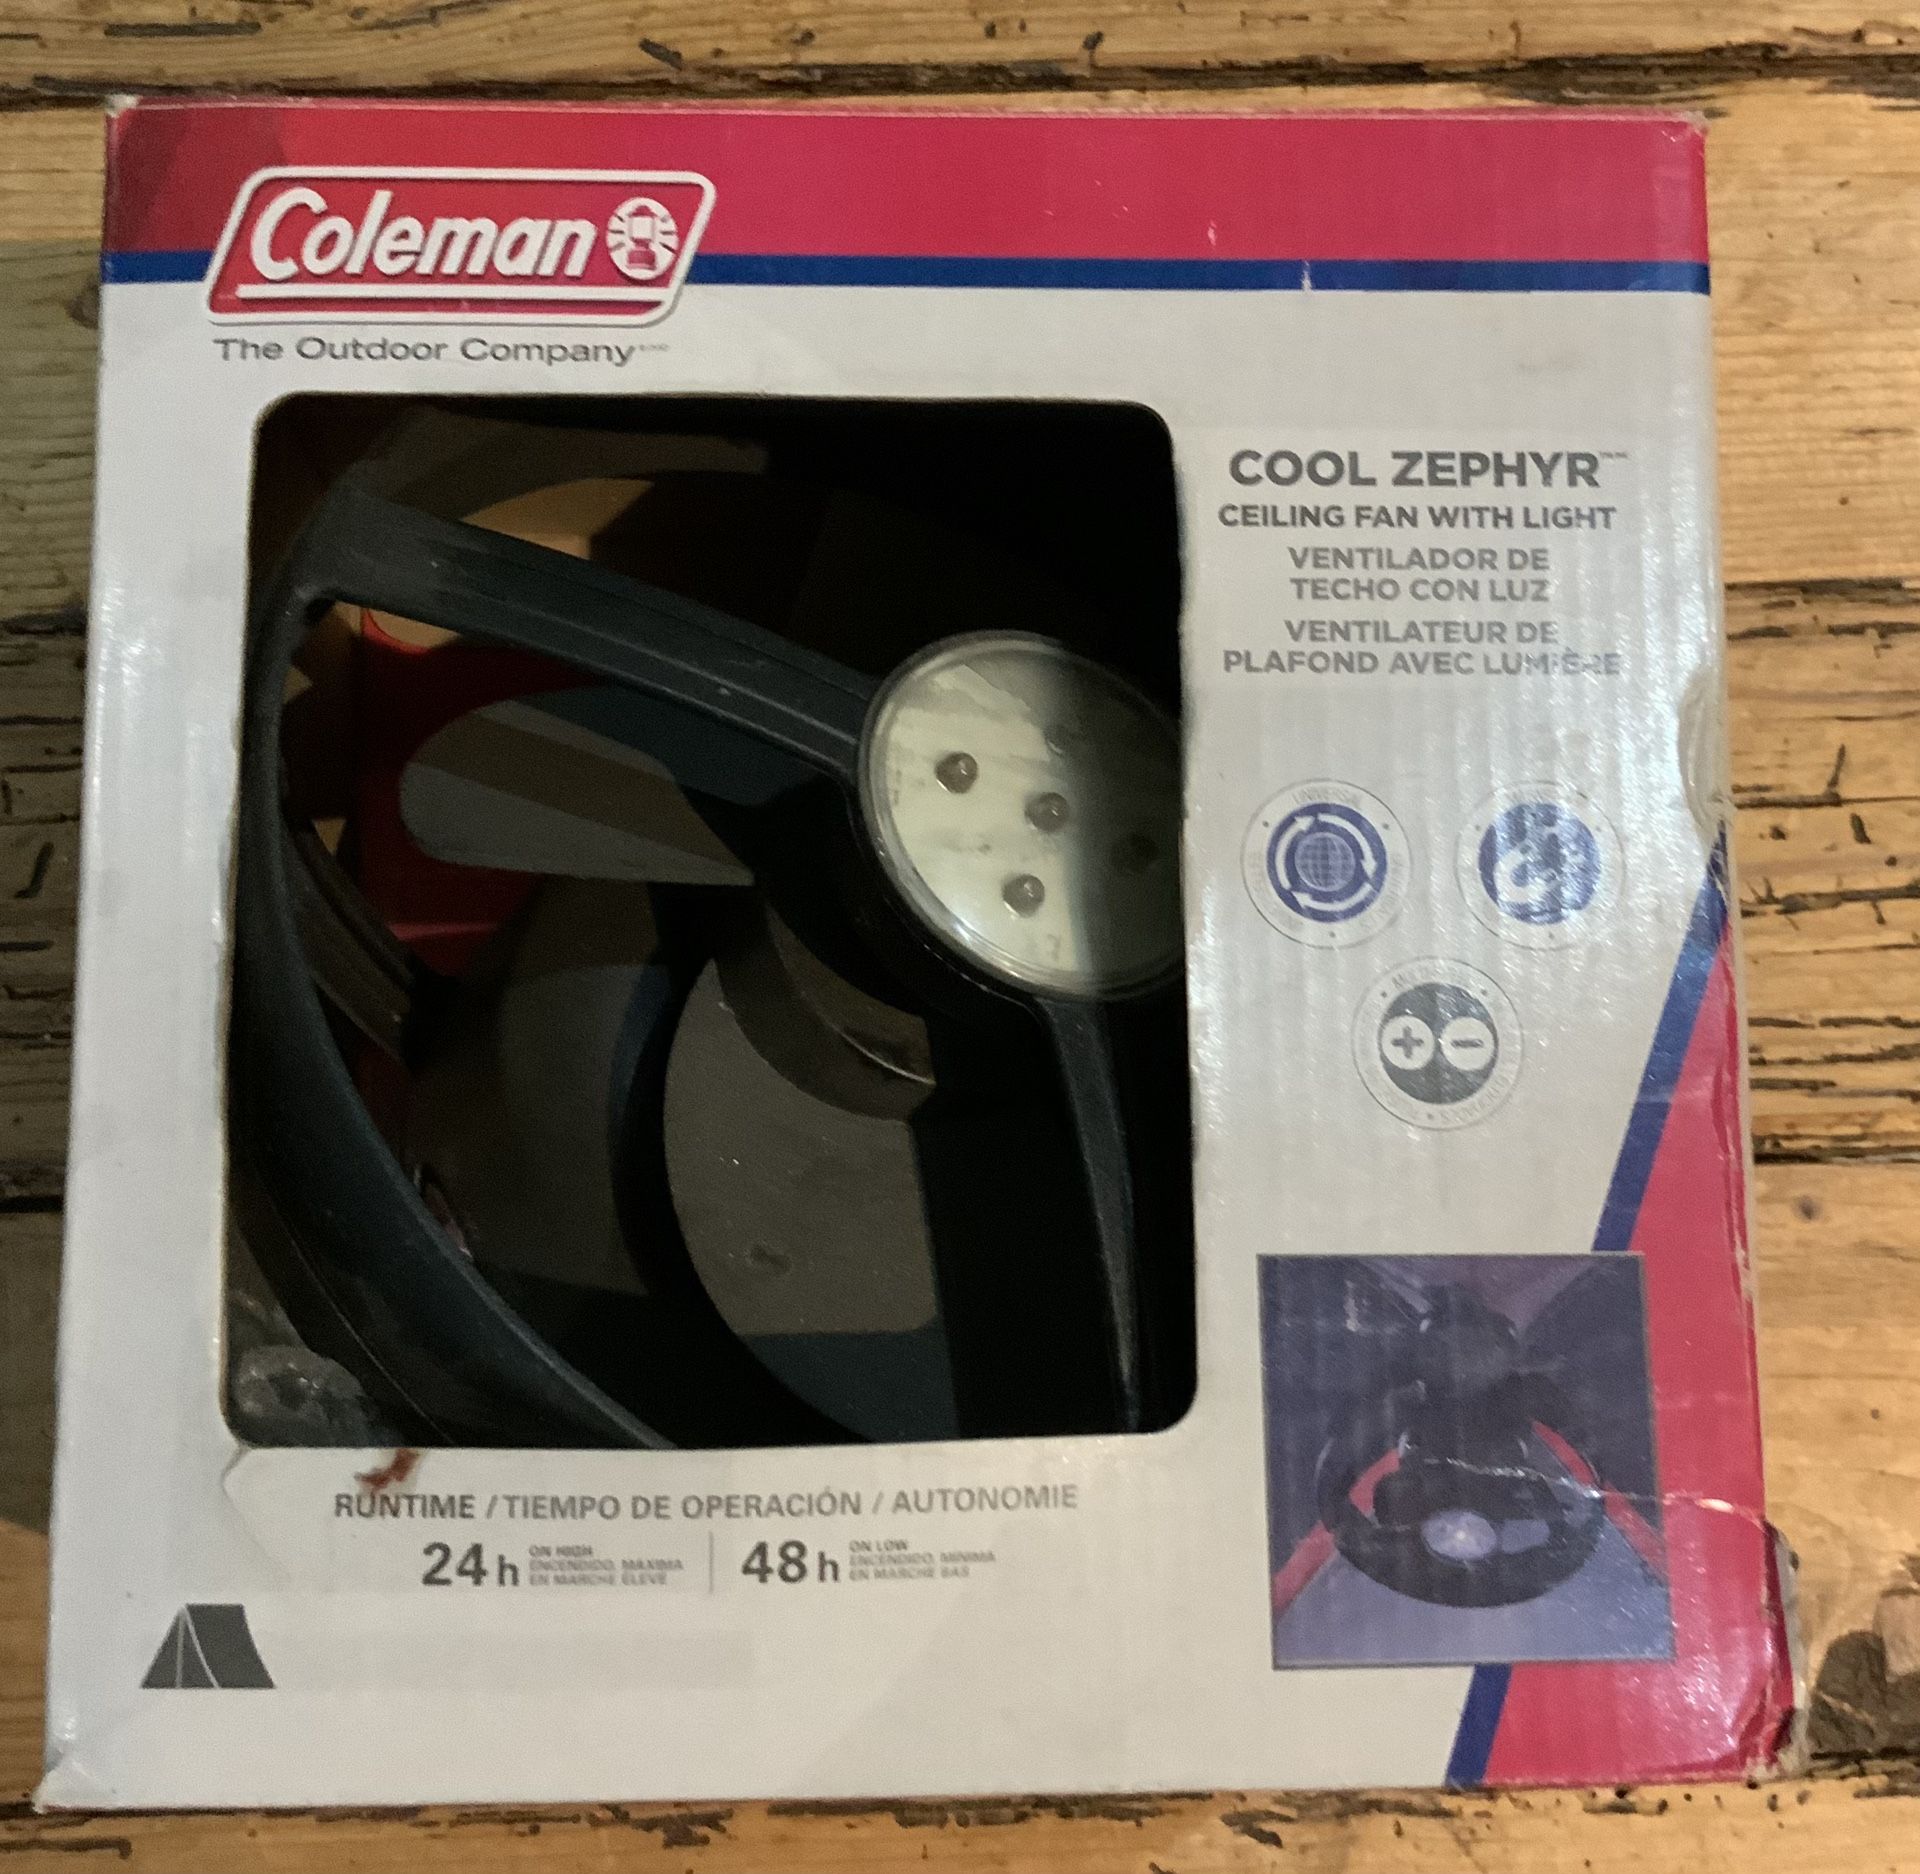 Coleman “Cool Zephyr” Camping Tent Battery Ceiling Fan & Light Adjustable